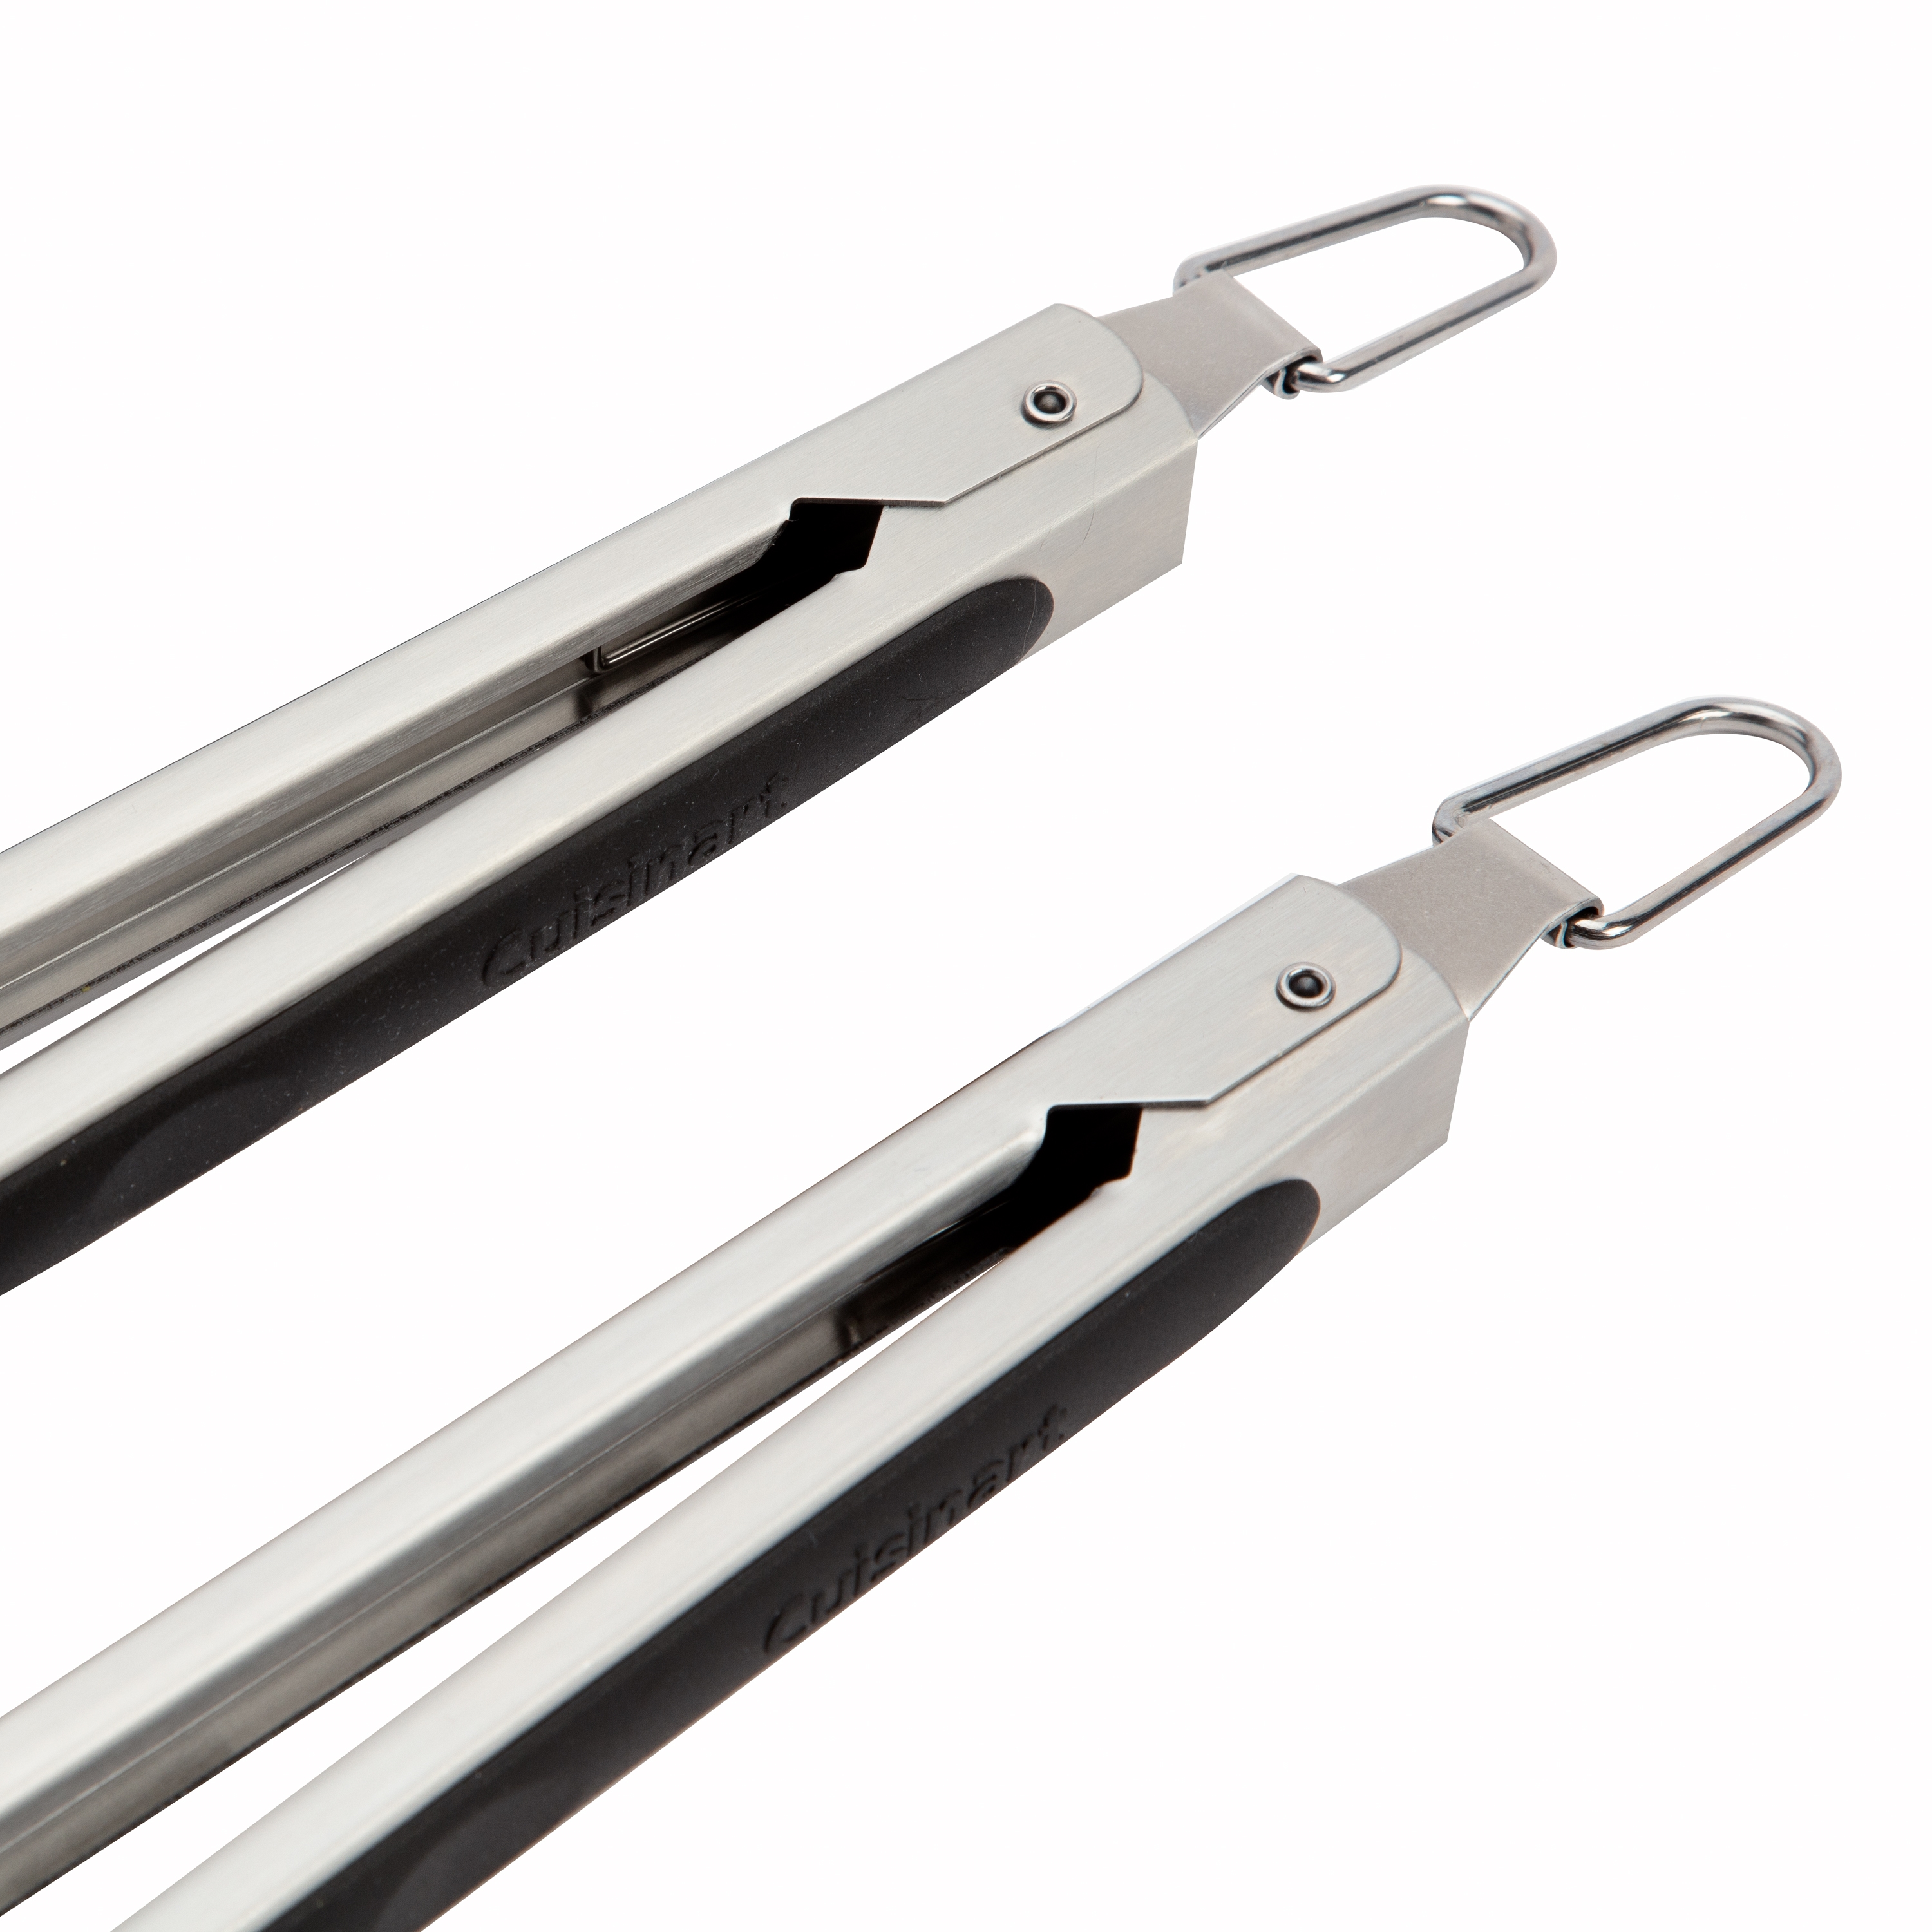 Cuisinart CGWM-011 Stainless Steel Grill Locking Tongs